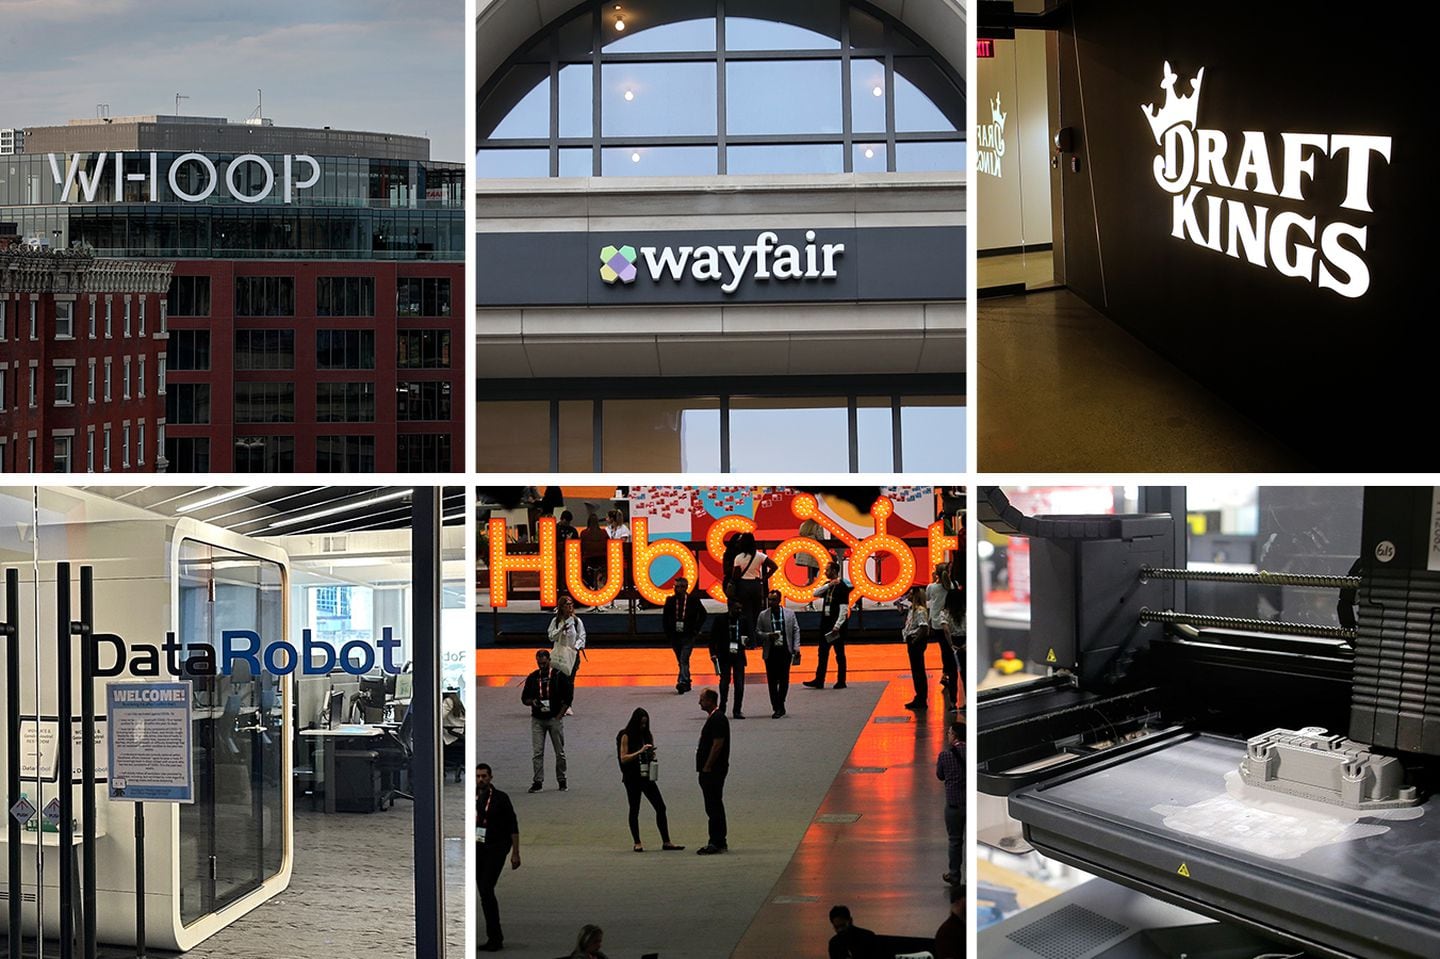 The WHOOP sign in Kenmore Square (top left). The Wayfair office location on Boylston Street (top center). The lobby of the DraftKings Back Bay offices (top right). DataRobot's office in downtown Boston (bottom left). Cambridge software company HubSpot at the Boston Convention and Exhibition Center (bottom center). A 3-D printer at the Desktop Metal headquarters in Burlington (bottom right). All of these Boston-area tech companies have conducted layoffs in the last six months.